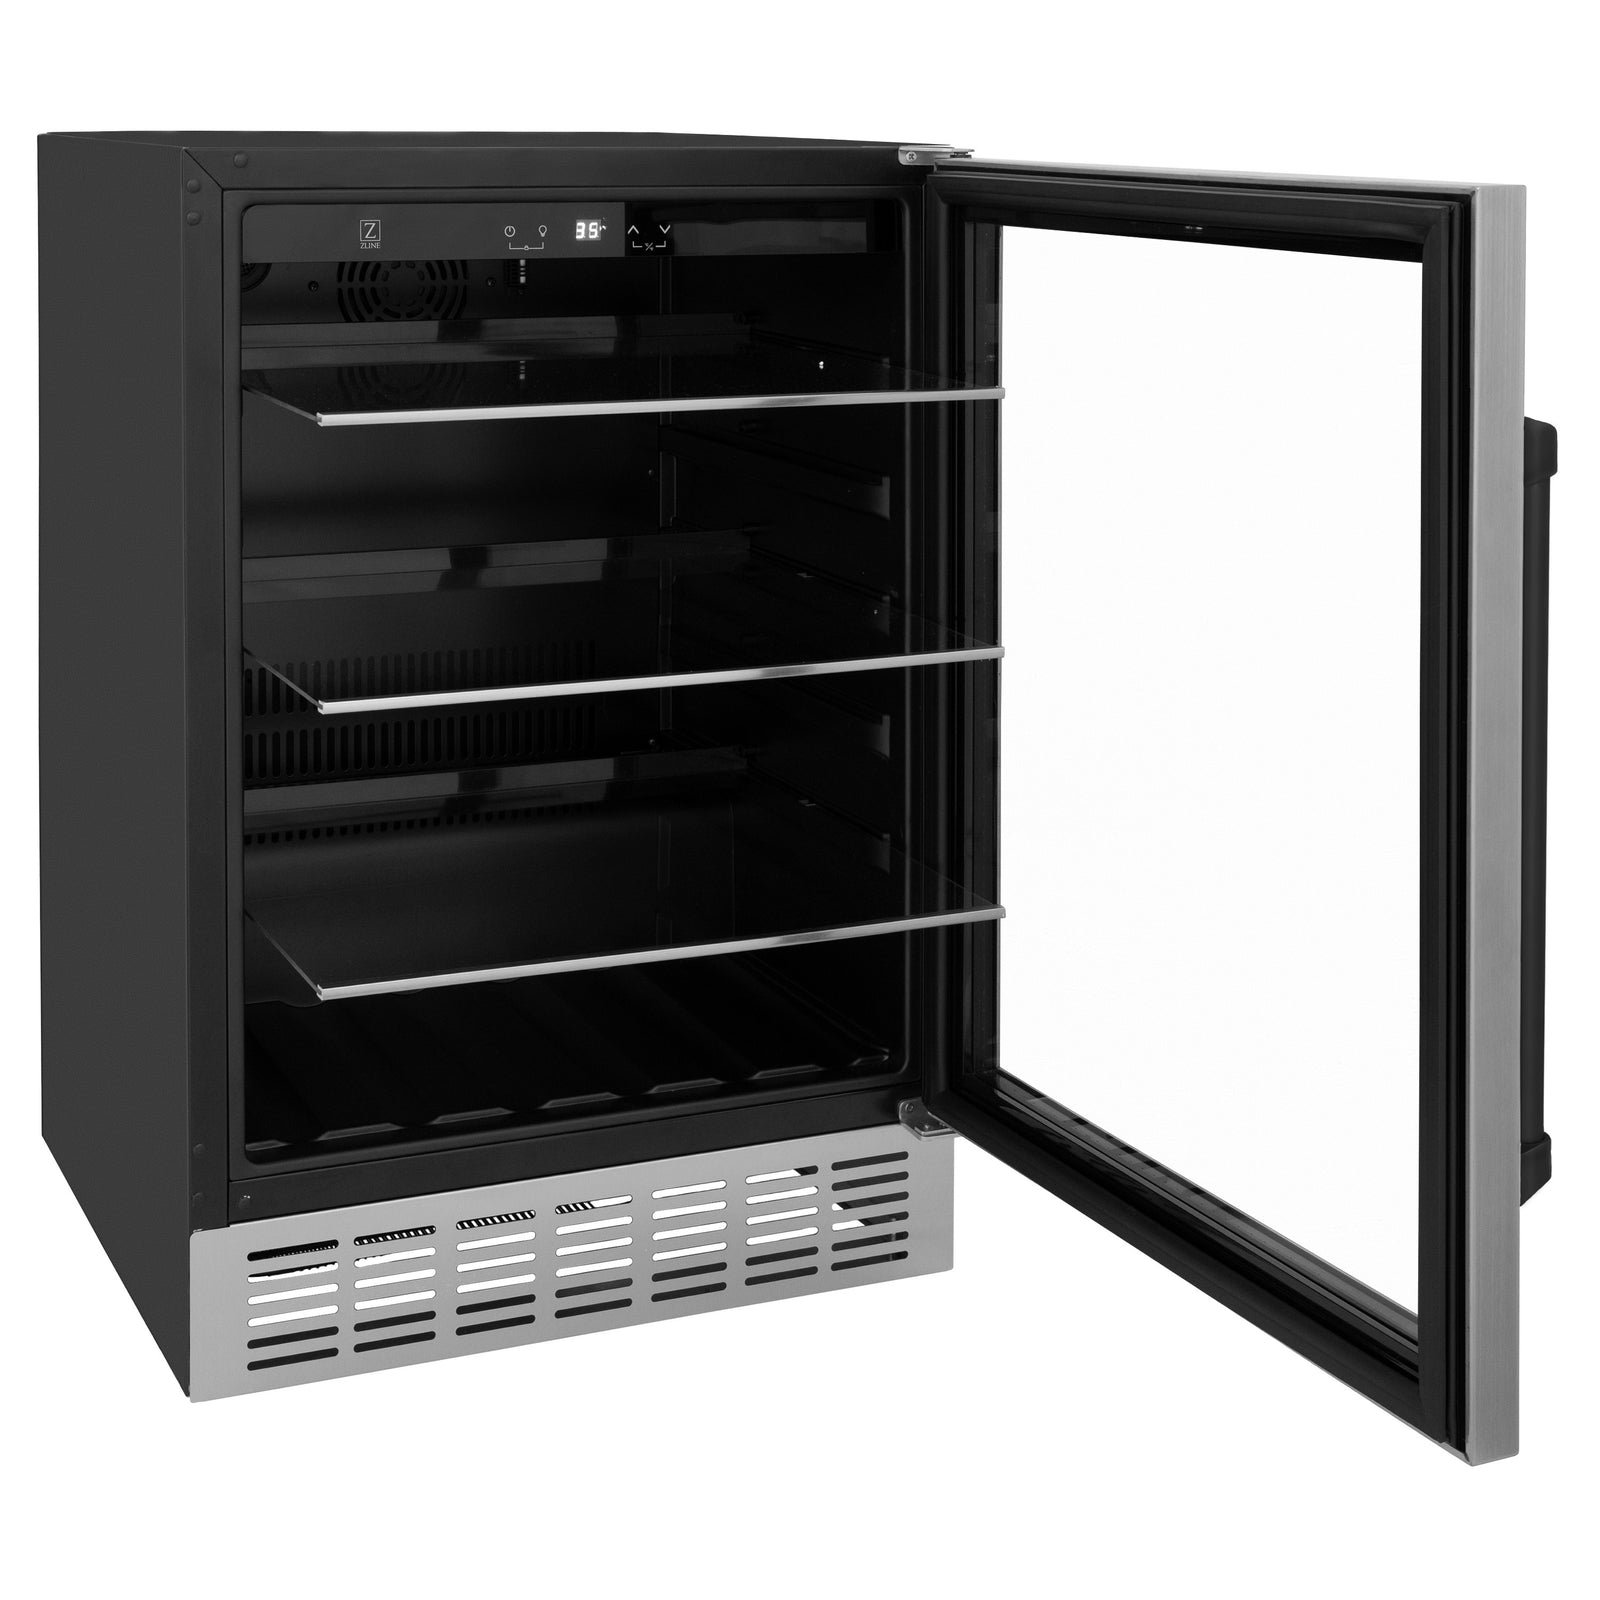 ZLINE 24" Autograph 154 Can Beverage Fridge in Stainless Steel with Black Accents - Monument Series, RBVZ-US-24-MB - Smart Kitchen Lab